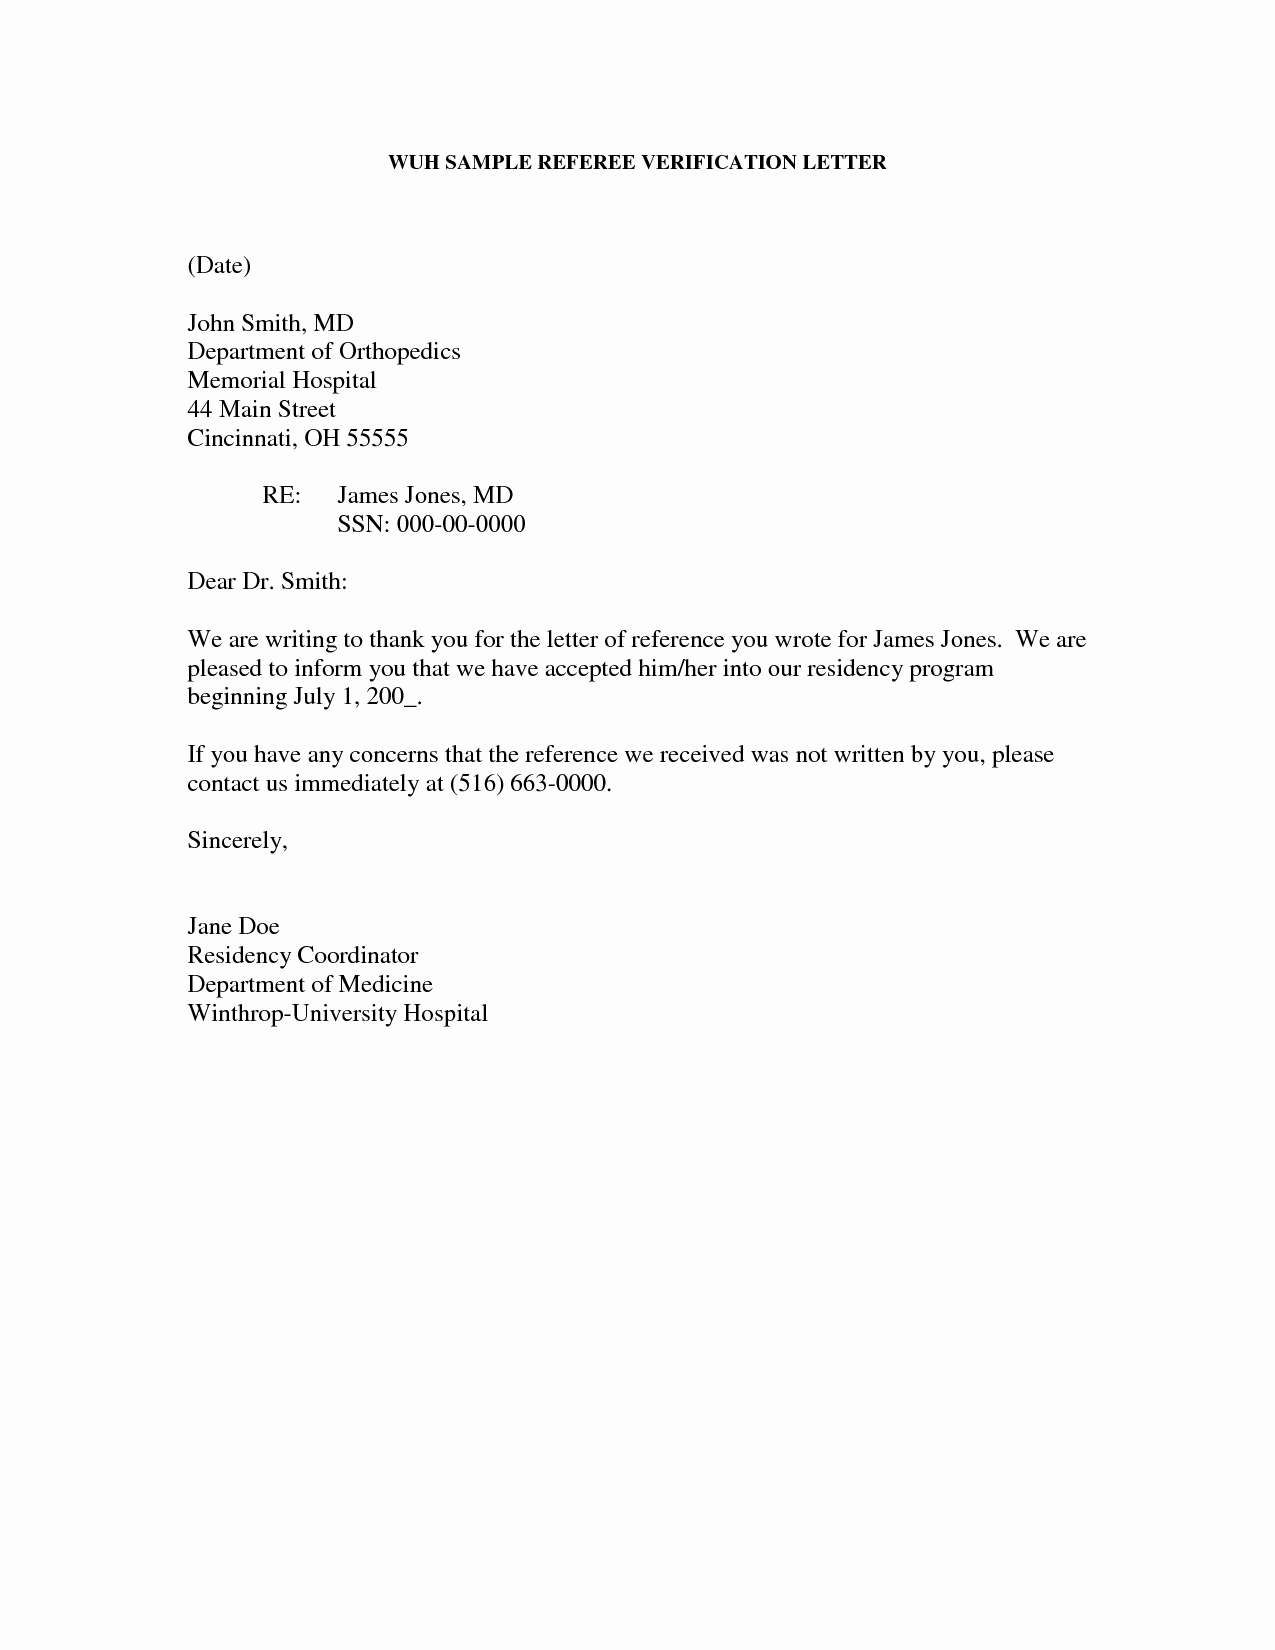 Proof Of Domicile Letter Sample Awesome Proof Residency Letter From Landlord Free Download